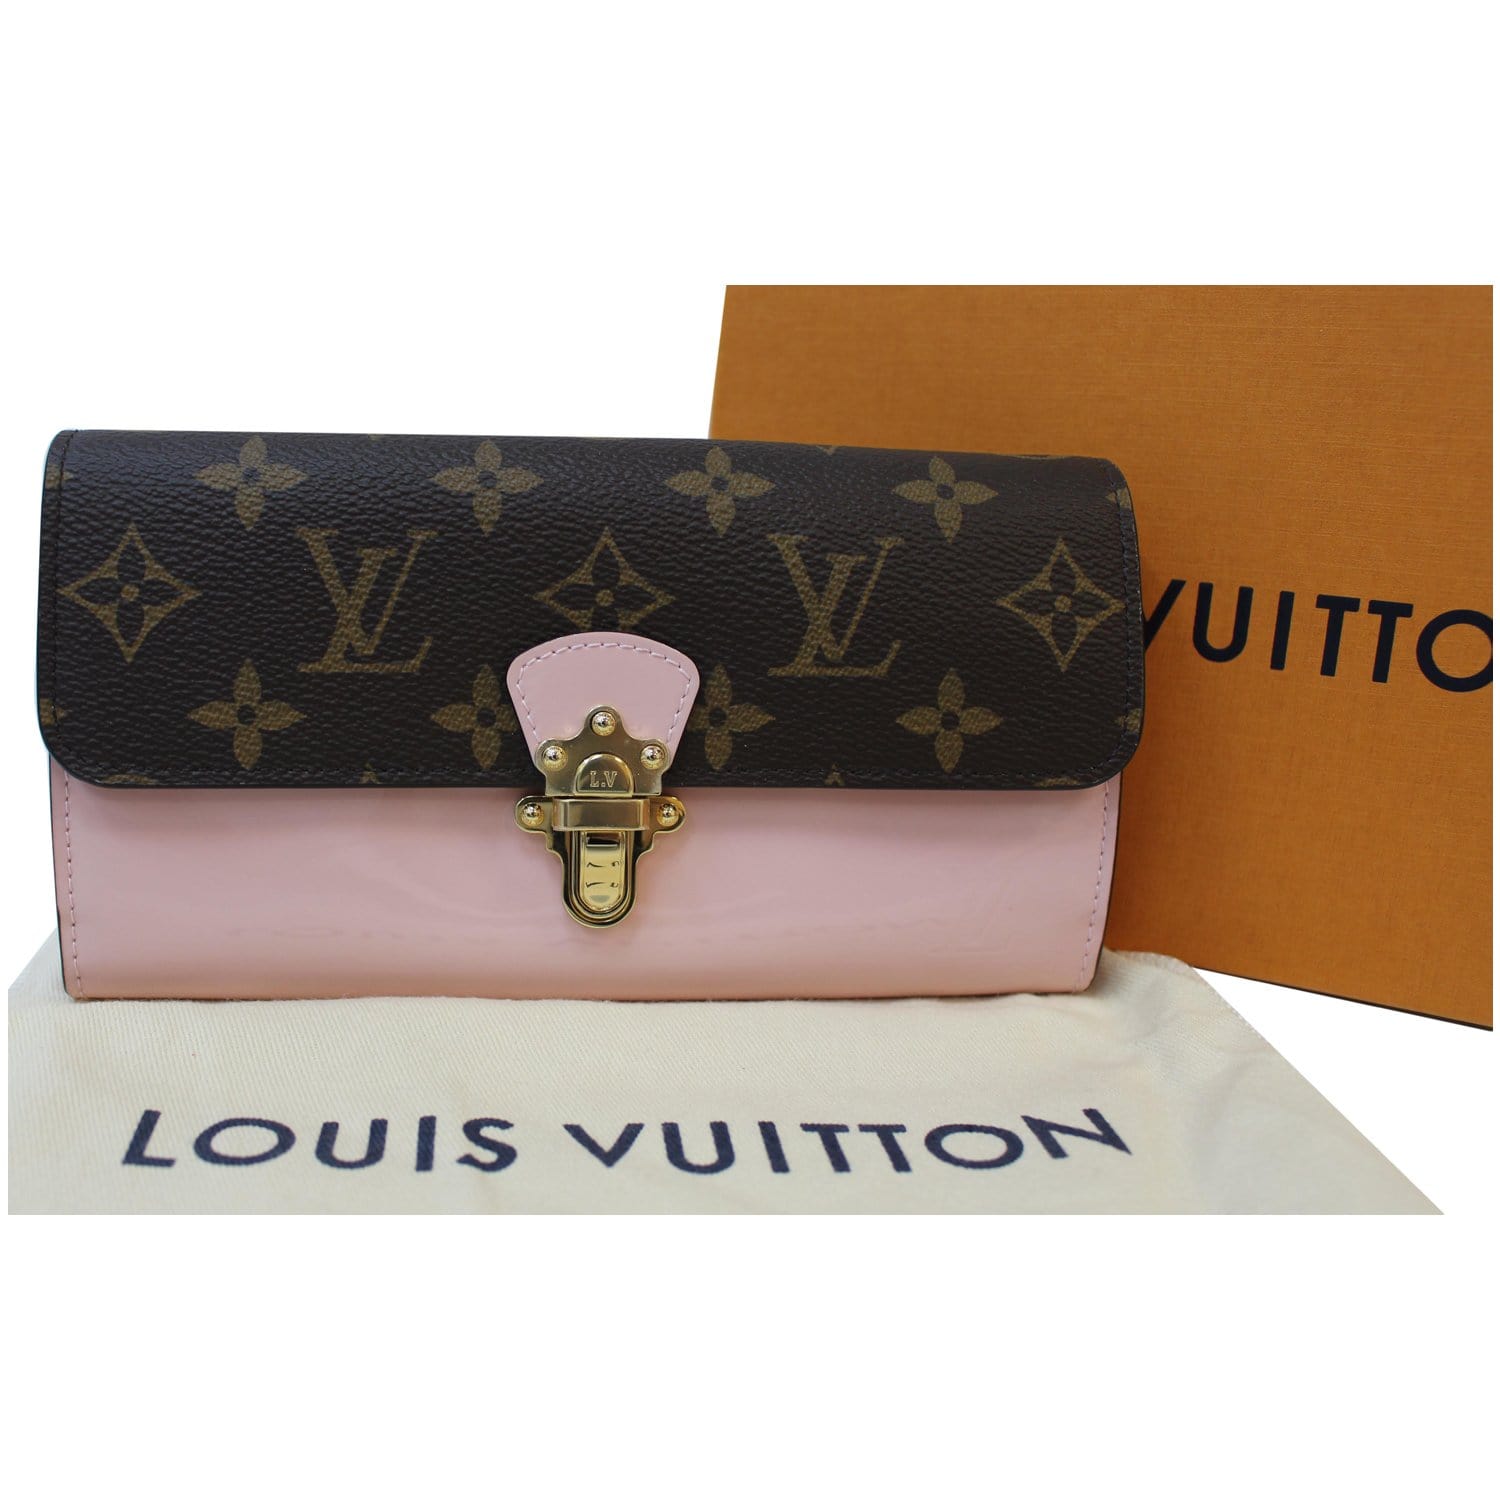 Buy LOUIS VUITTON Portefeuil Cherry Wood M61719 Long Wallet Monogram Vernis  Rose Ballerine (Pink) / 083038 [Used] from Japan - Buy authentic Plus  exclusive items from Japan